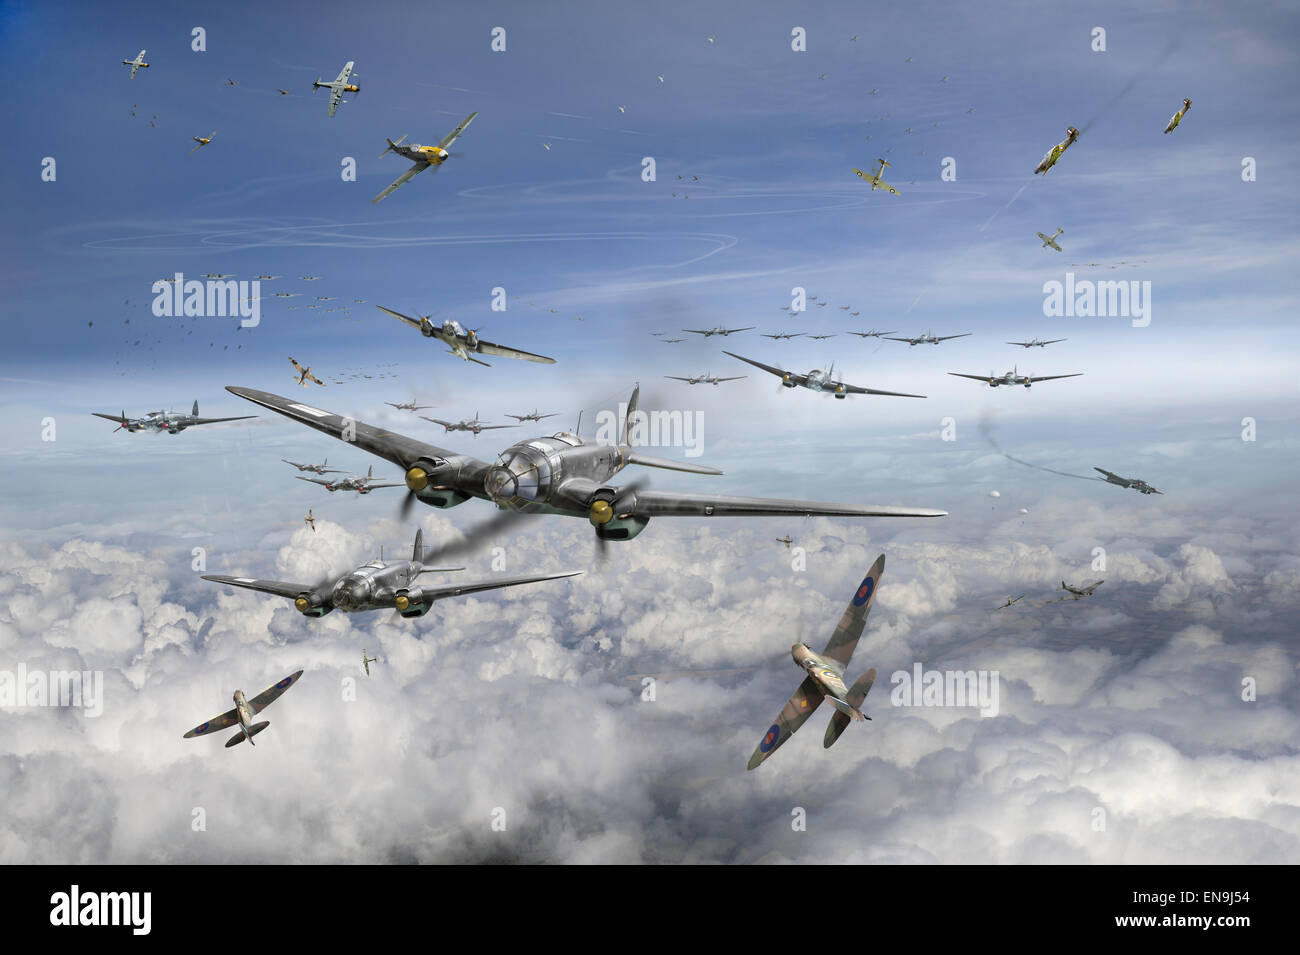 15 September 1940: a key date in the Battle of Britain, as the RAF saw off waves of attacking Luftwaffe bombers and fighters. Stock Photo